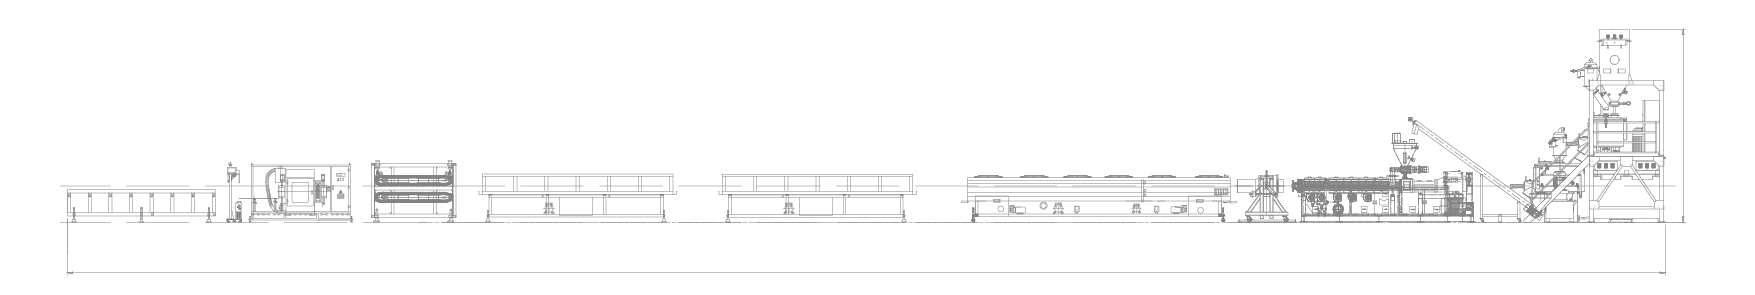 PVC_Pipe_Producttion_Line_Layout_Drawing.png